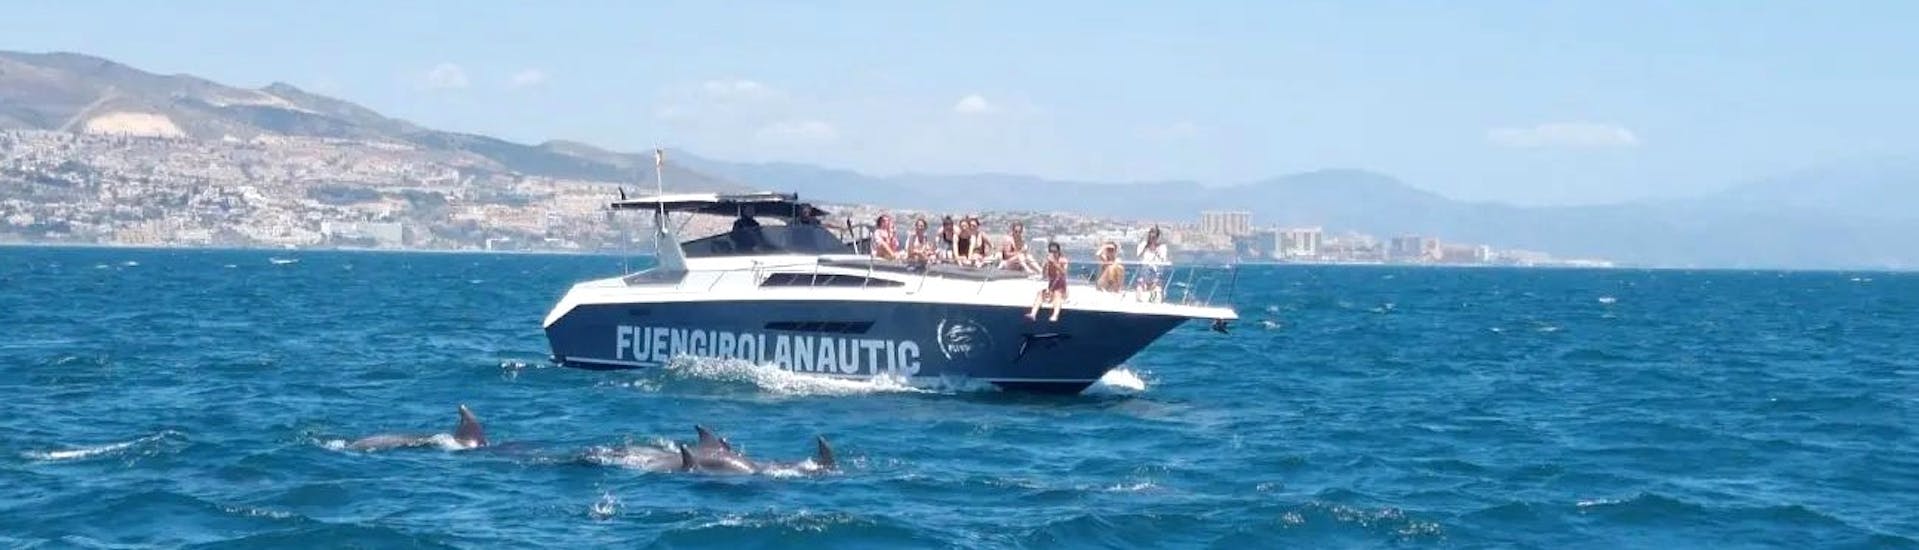 People observing dolphins from the boat during a Semi-Private Boat Trip from Fuengirola with Dolphin Watching with Fuengirolanautic.